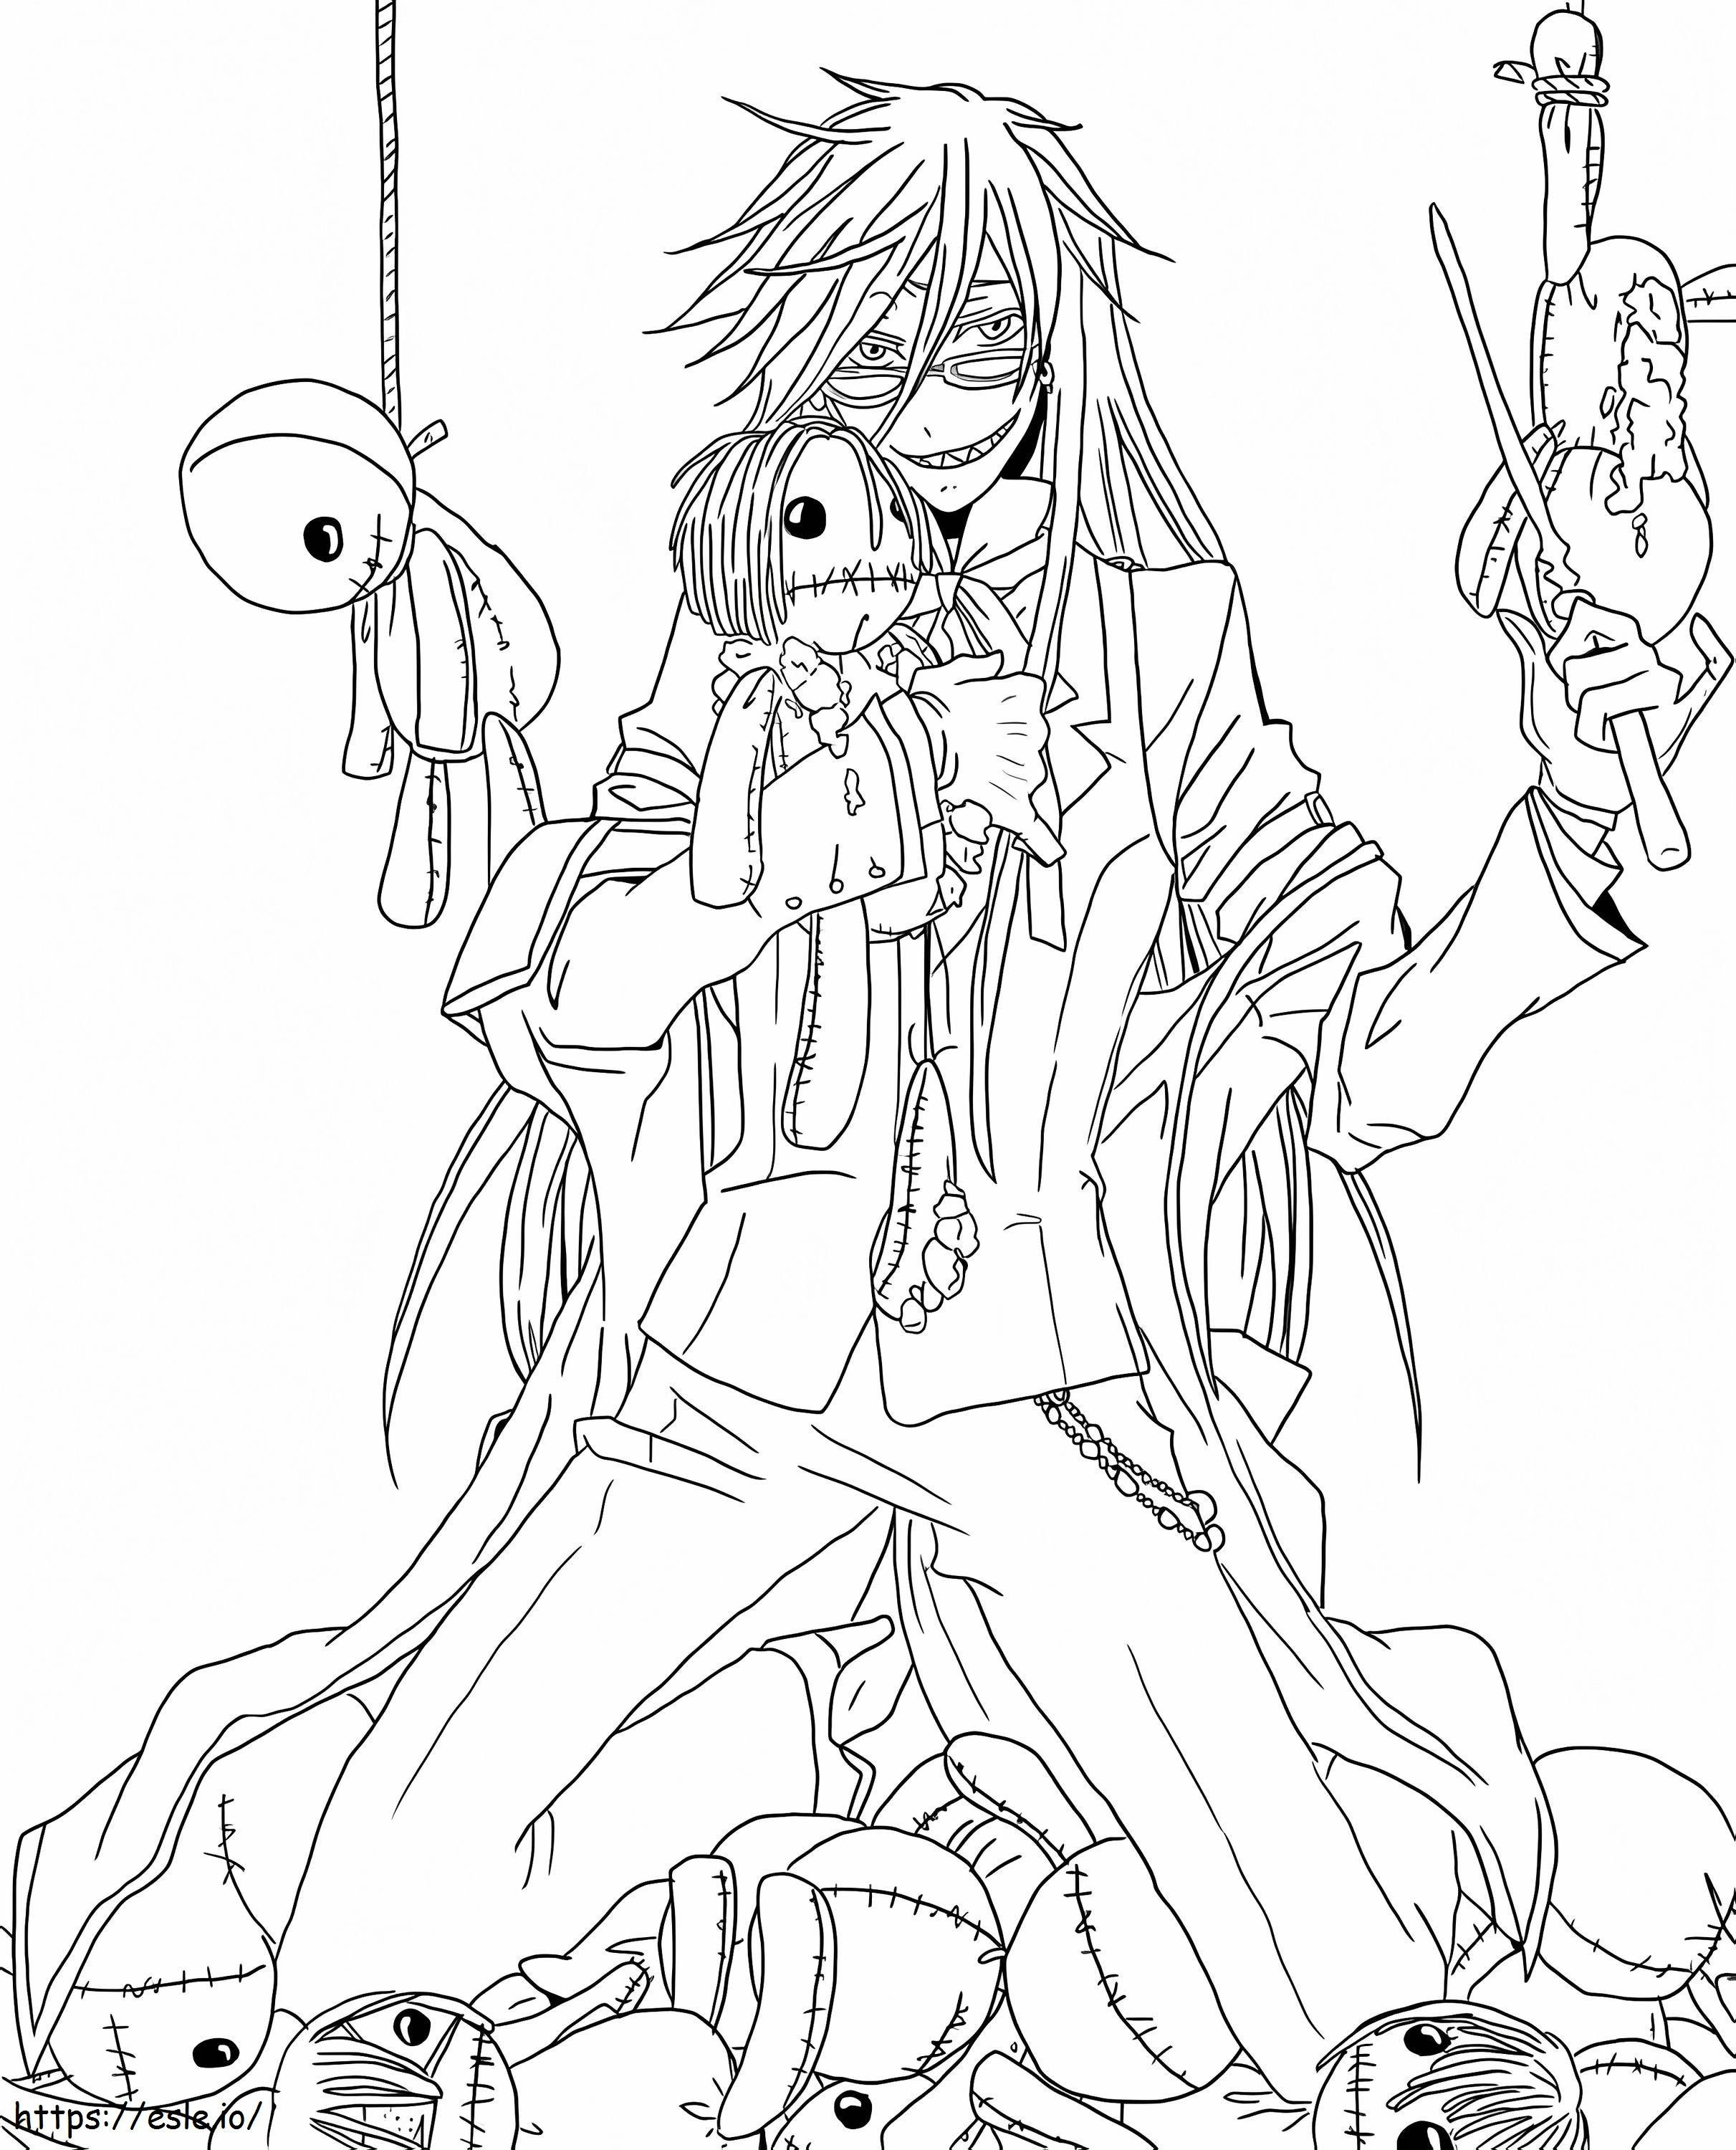 Grell Sutcliff From Black Butler coloring page